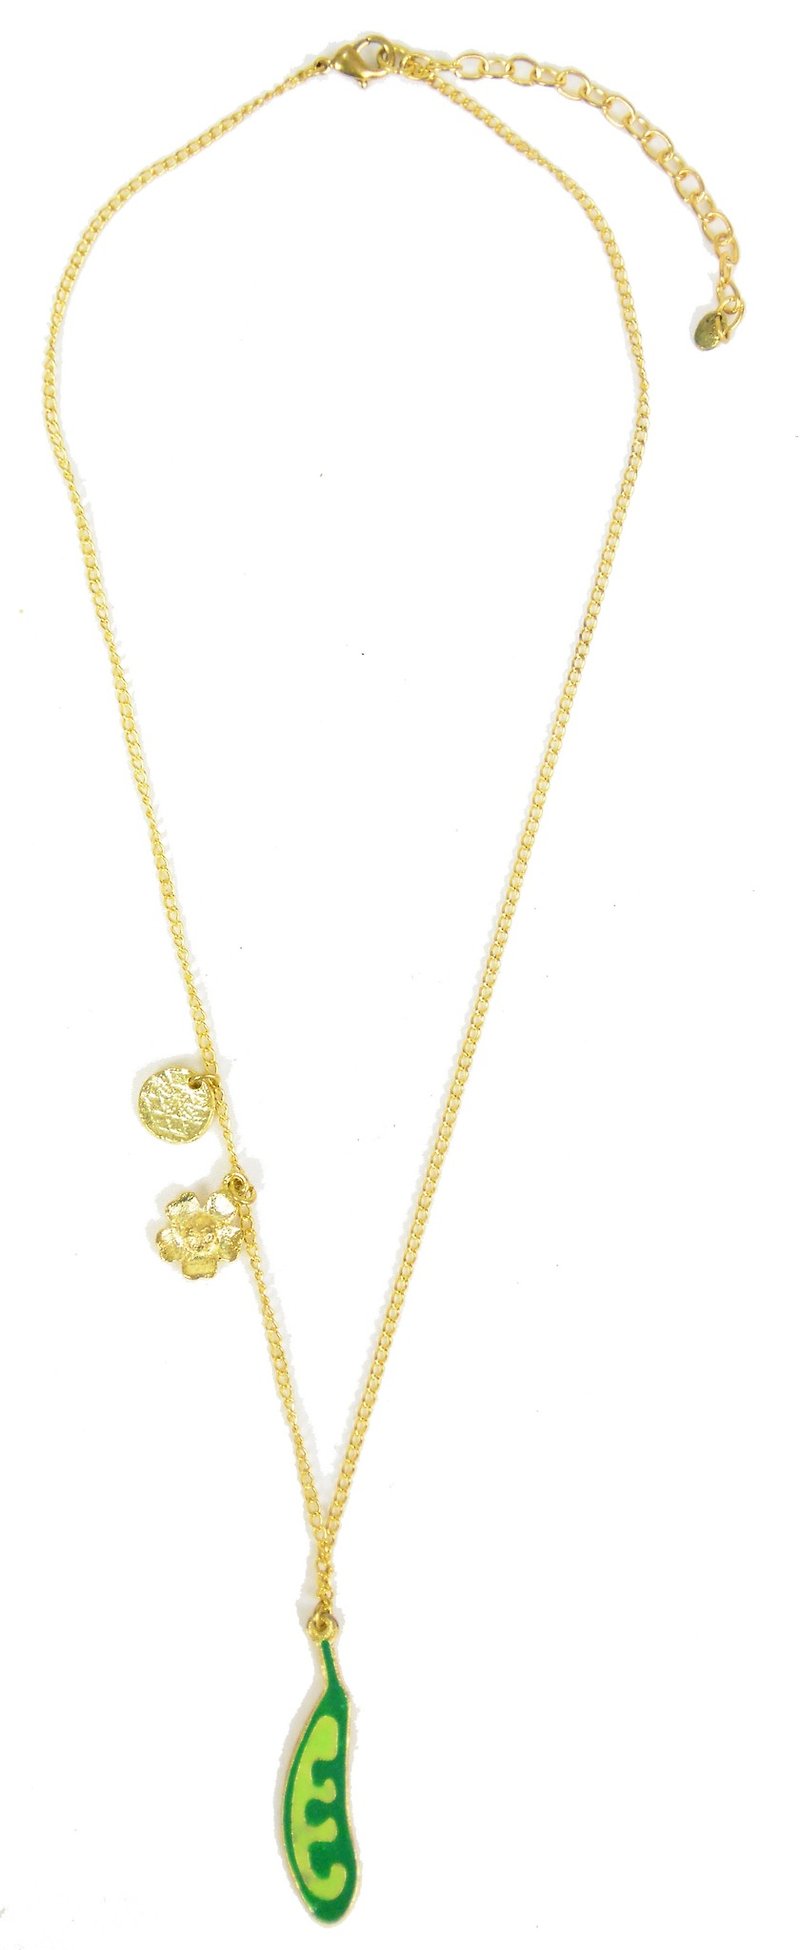 Jack's Pea_Necklace_ Fair Trade - ネックレス - 金属 グリーン